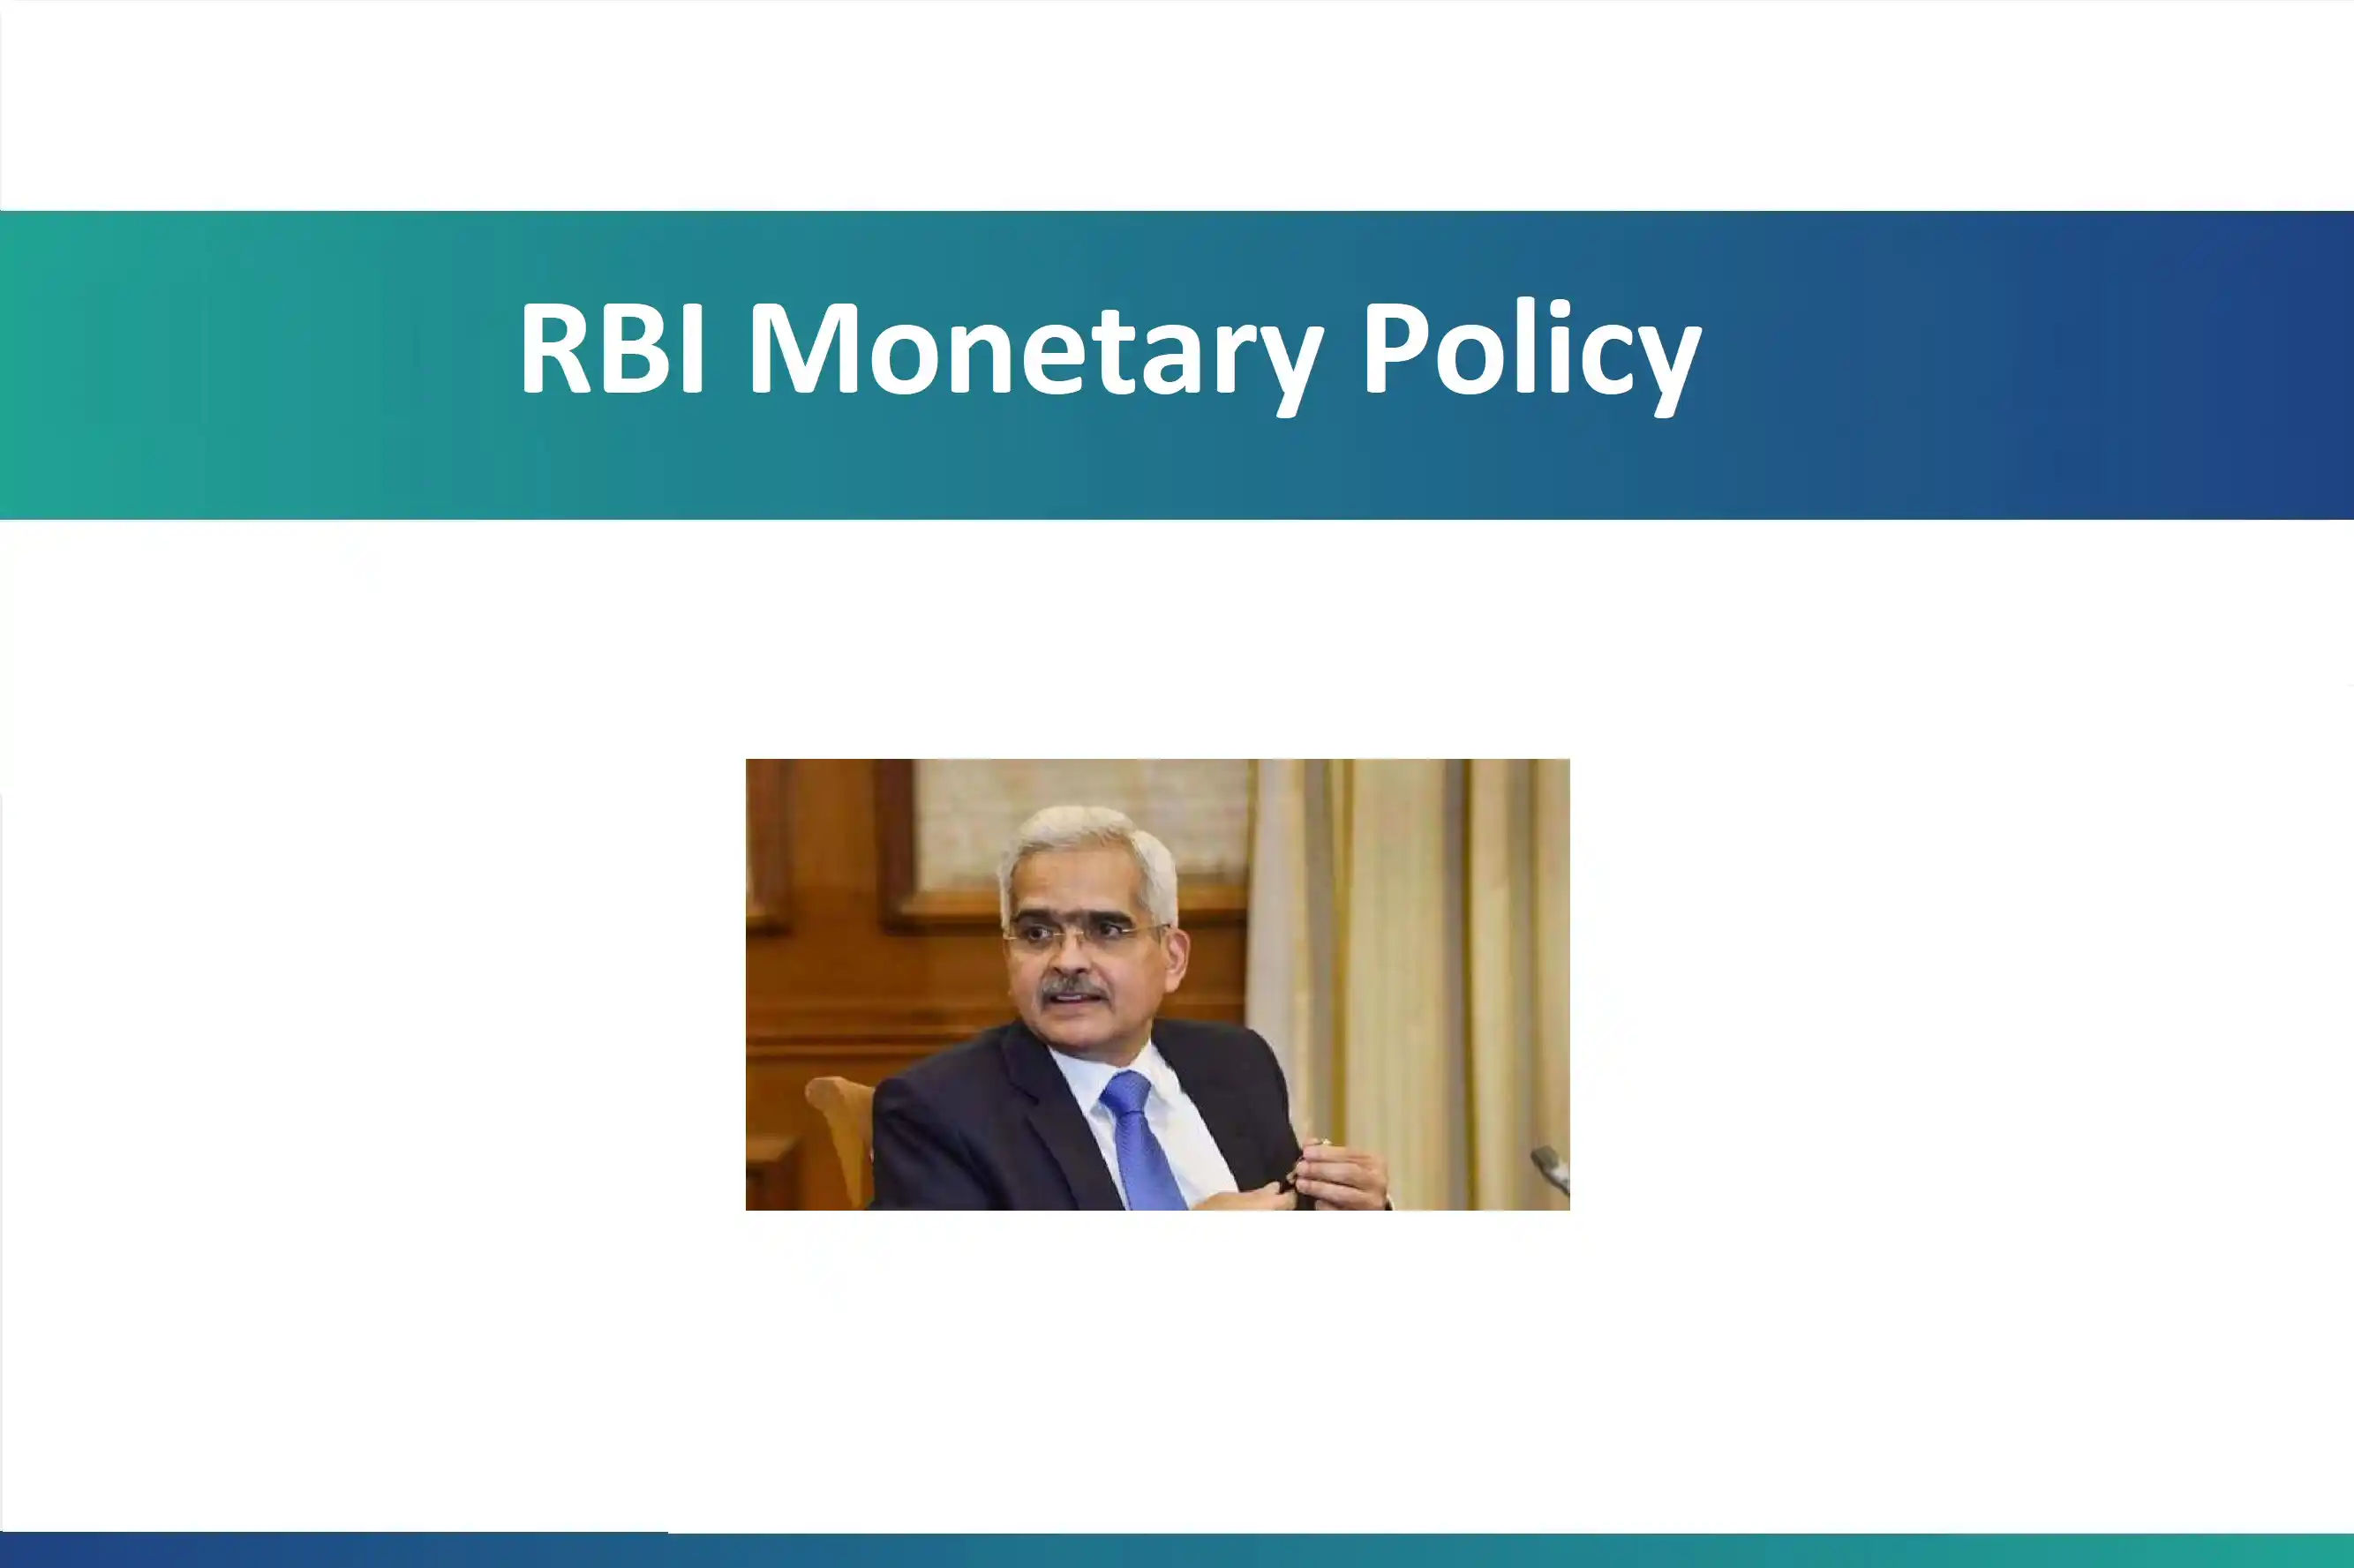 Takeaways from the RBI Monetary Policy meeting